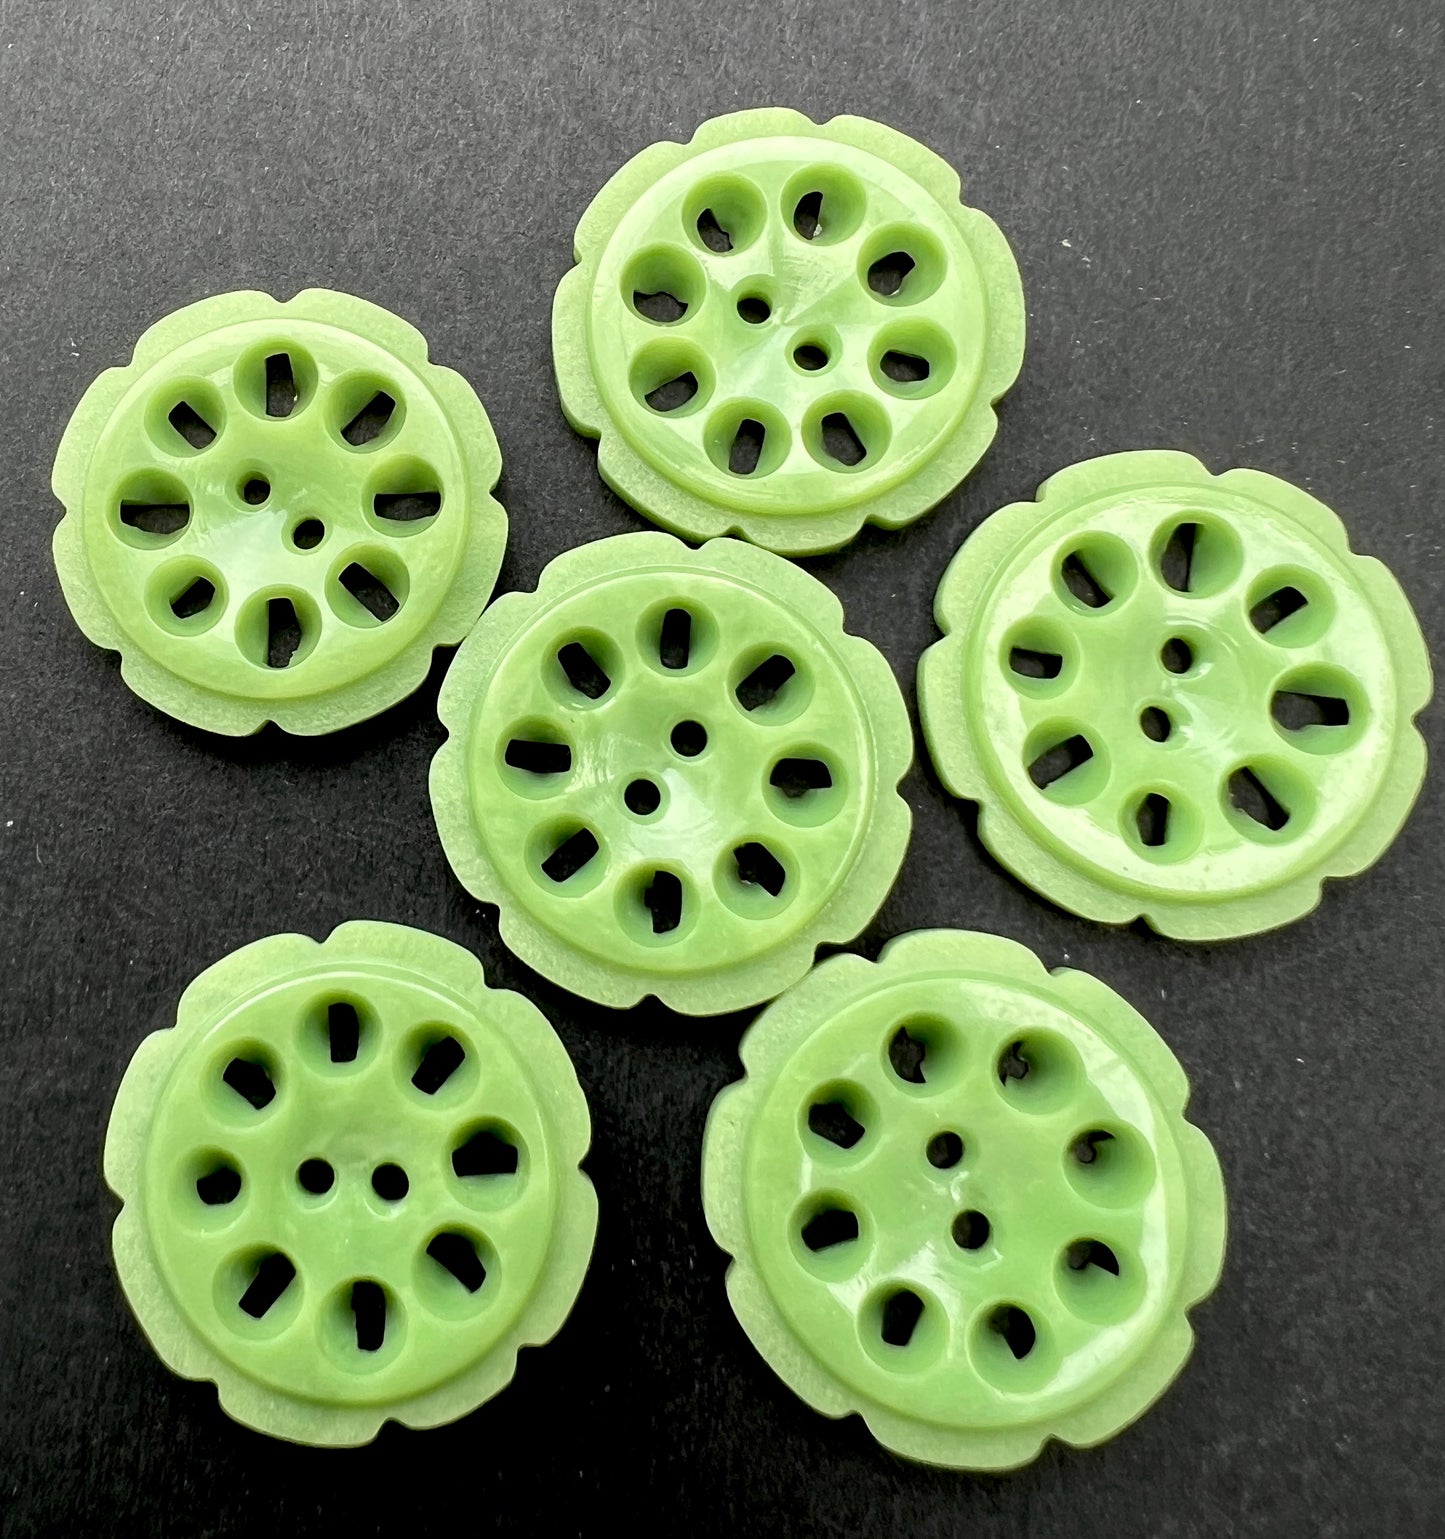 Soft Lime Green 2.2cm Vintage French Buttons - 6 or 24